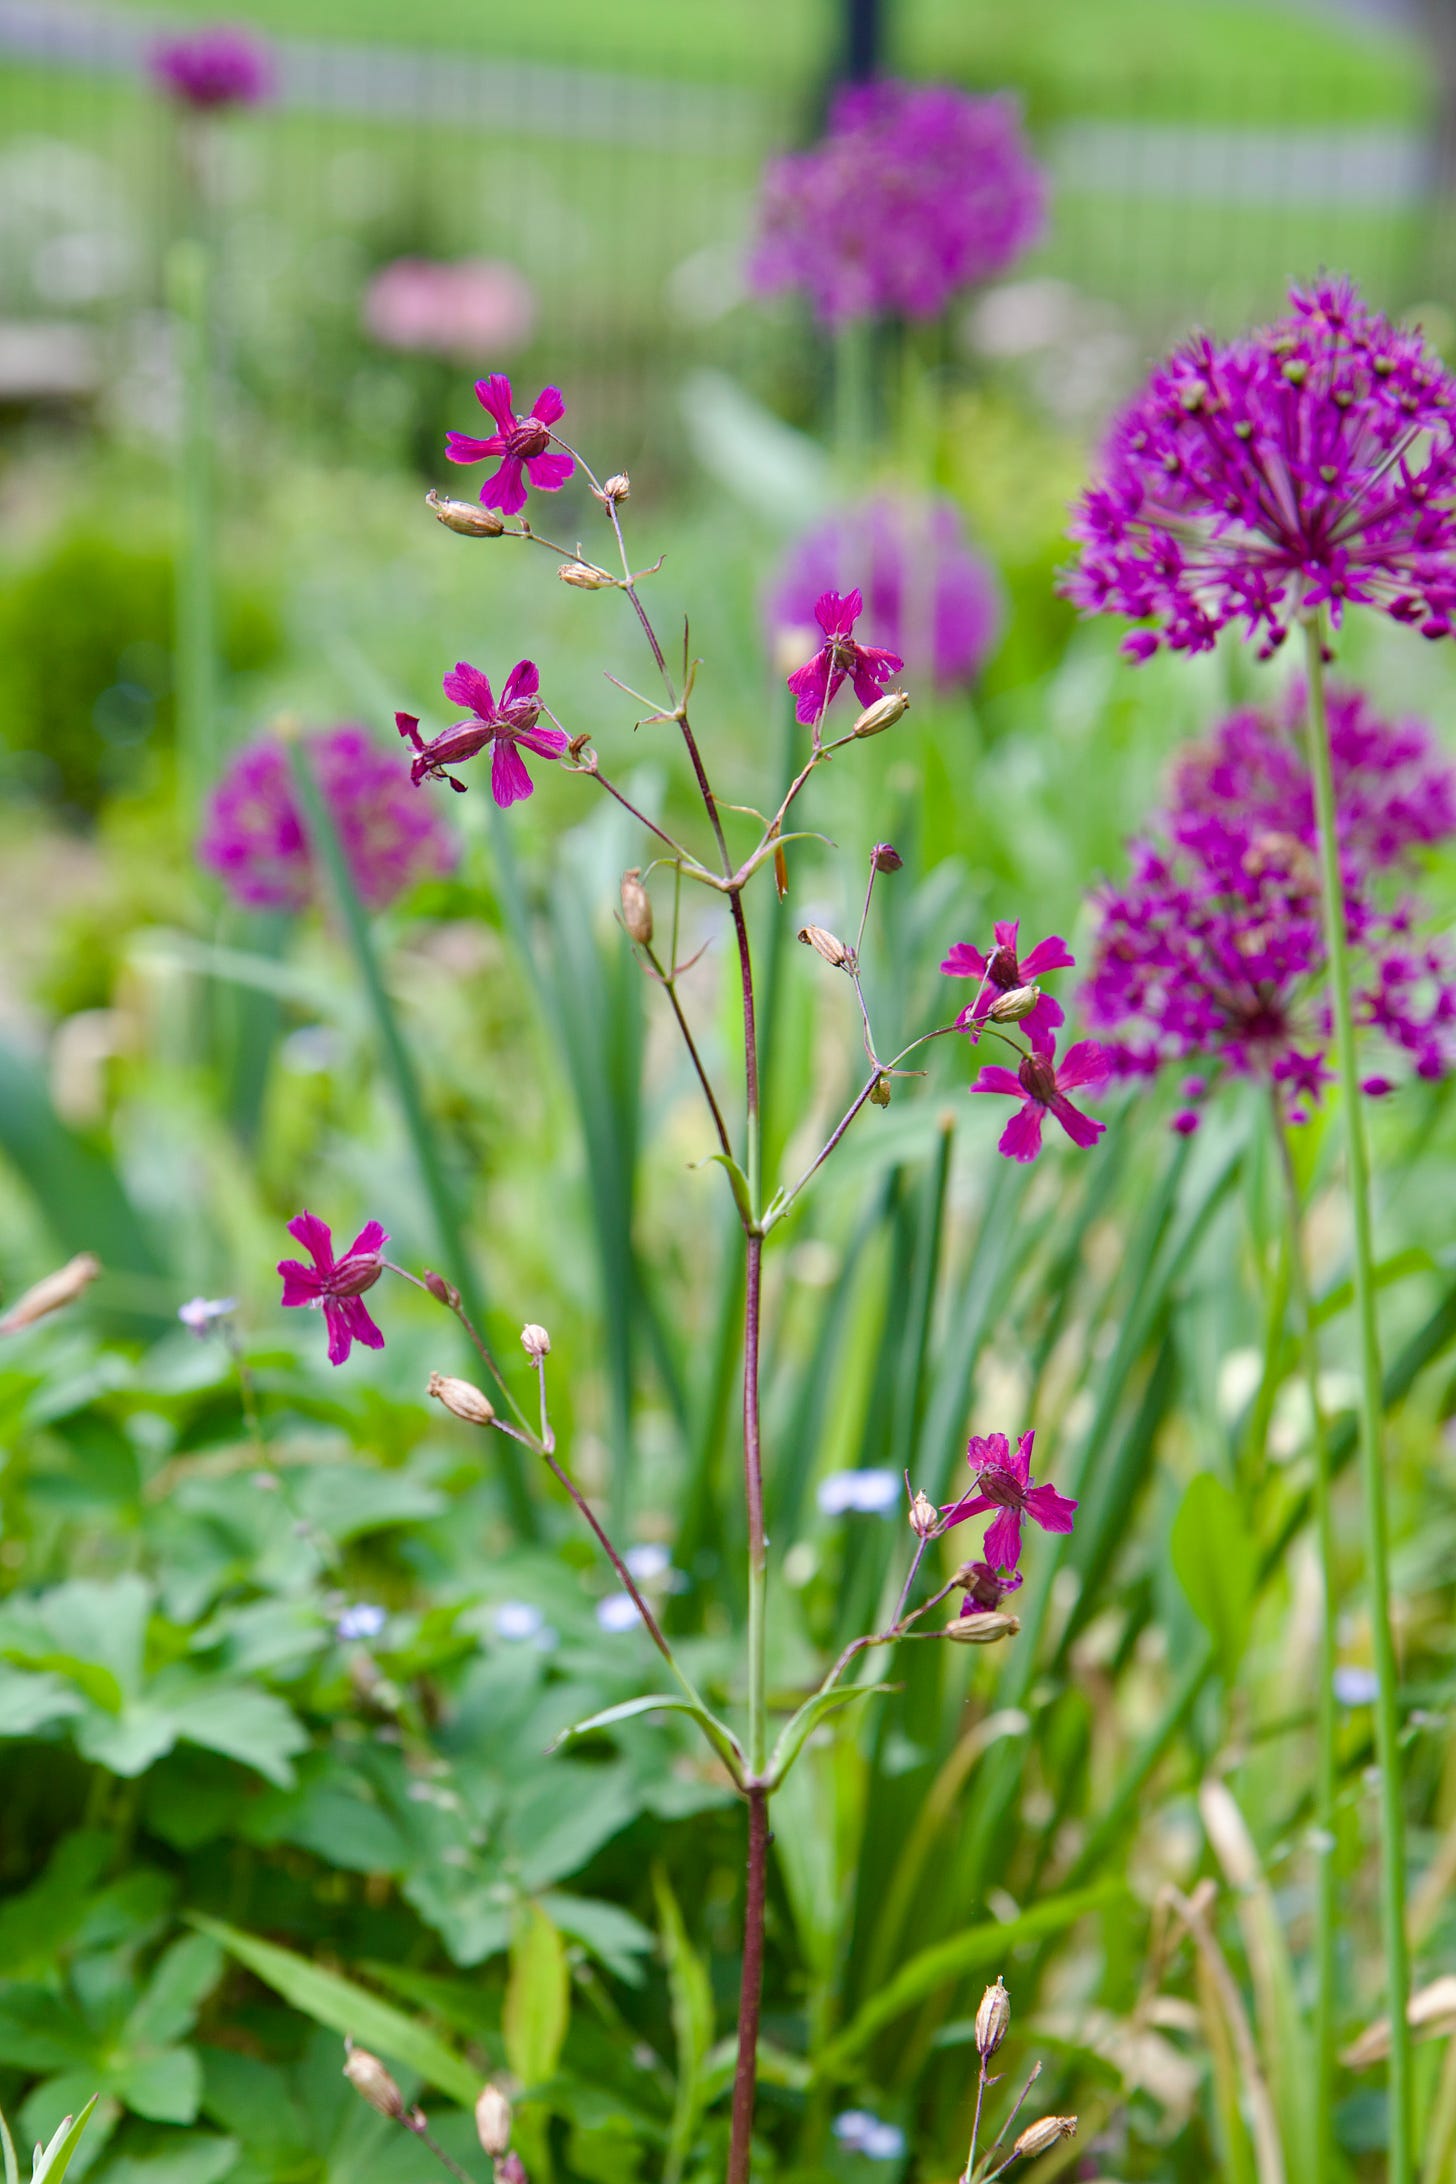 A pretty edition to our garden this past year is Lychnis viscaria, known as the “Clammy campion.” Much prettier than its common name, you can see that the color rivals the Allium ‘Purple Sensation’ in the Cottage Garden.